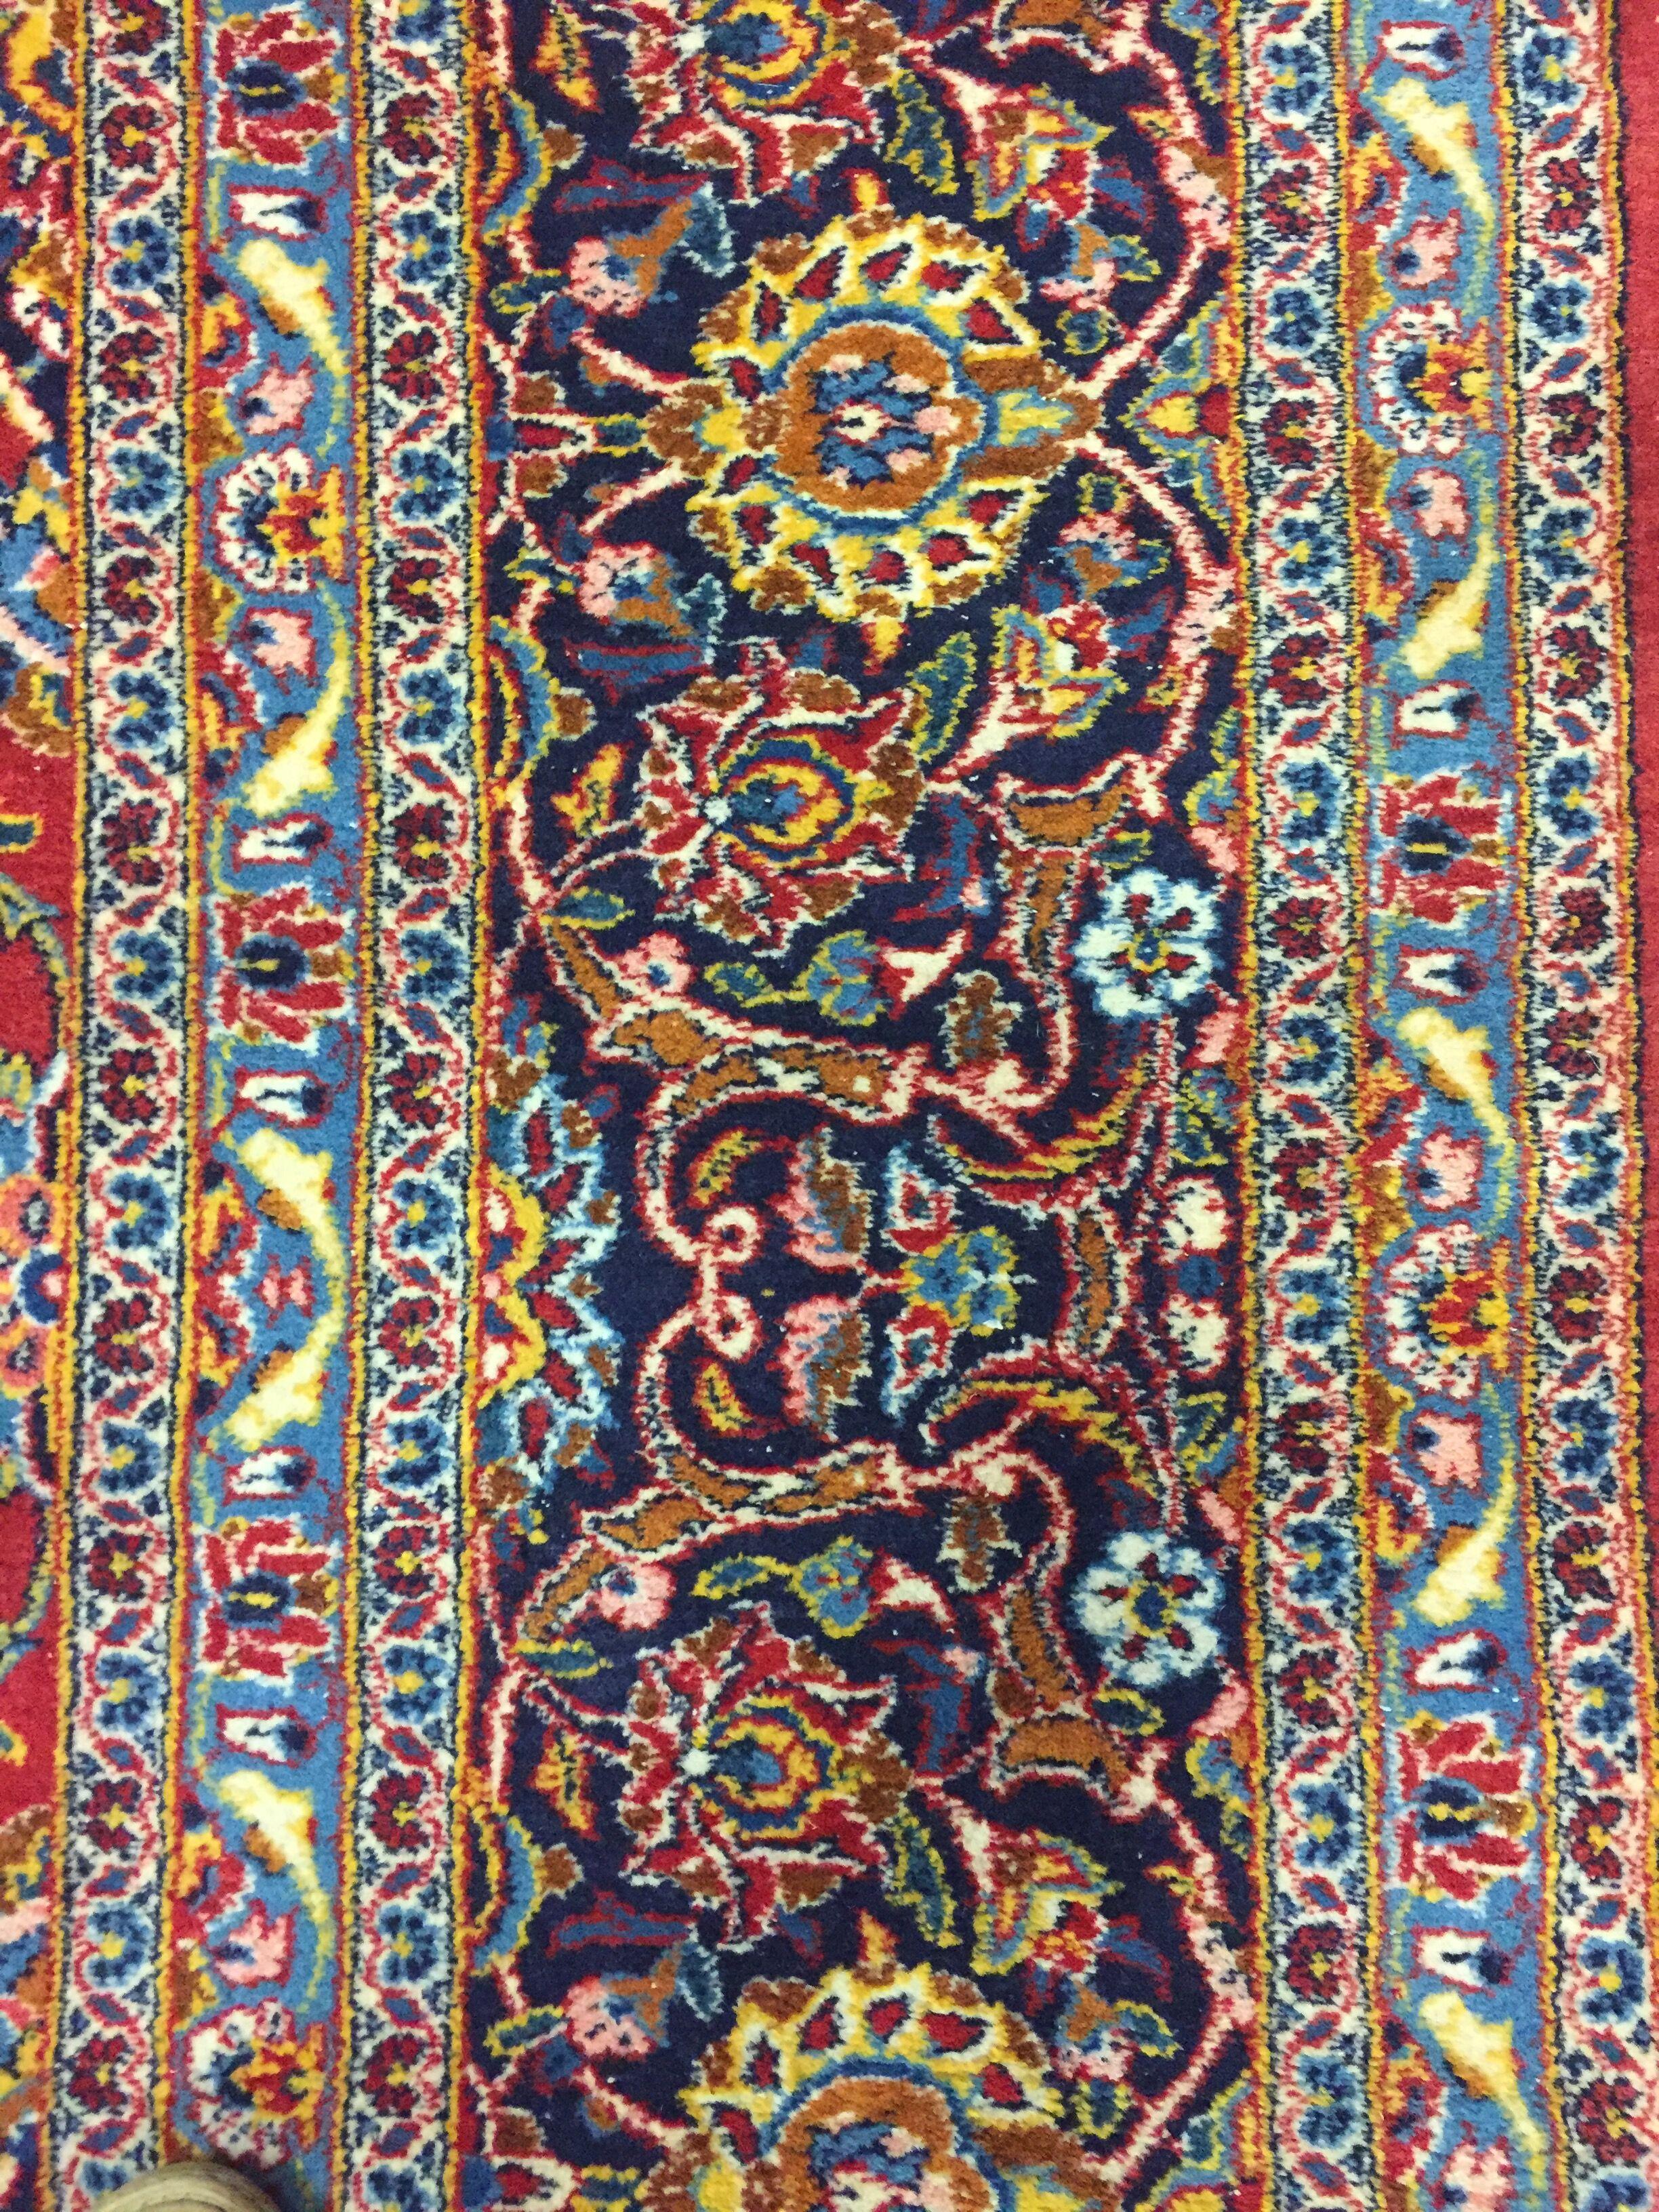 Vintage Persian Kashan rug, 10'4 x 14'5. From Kashan in Persia this is a Classic vintage piece that will enhance any room setting. Colors: Reds/blues.